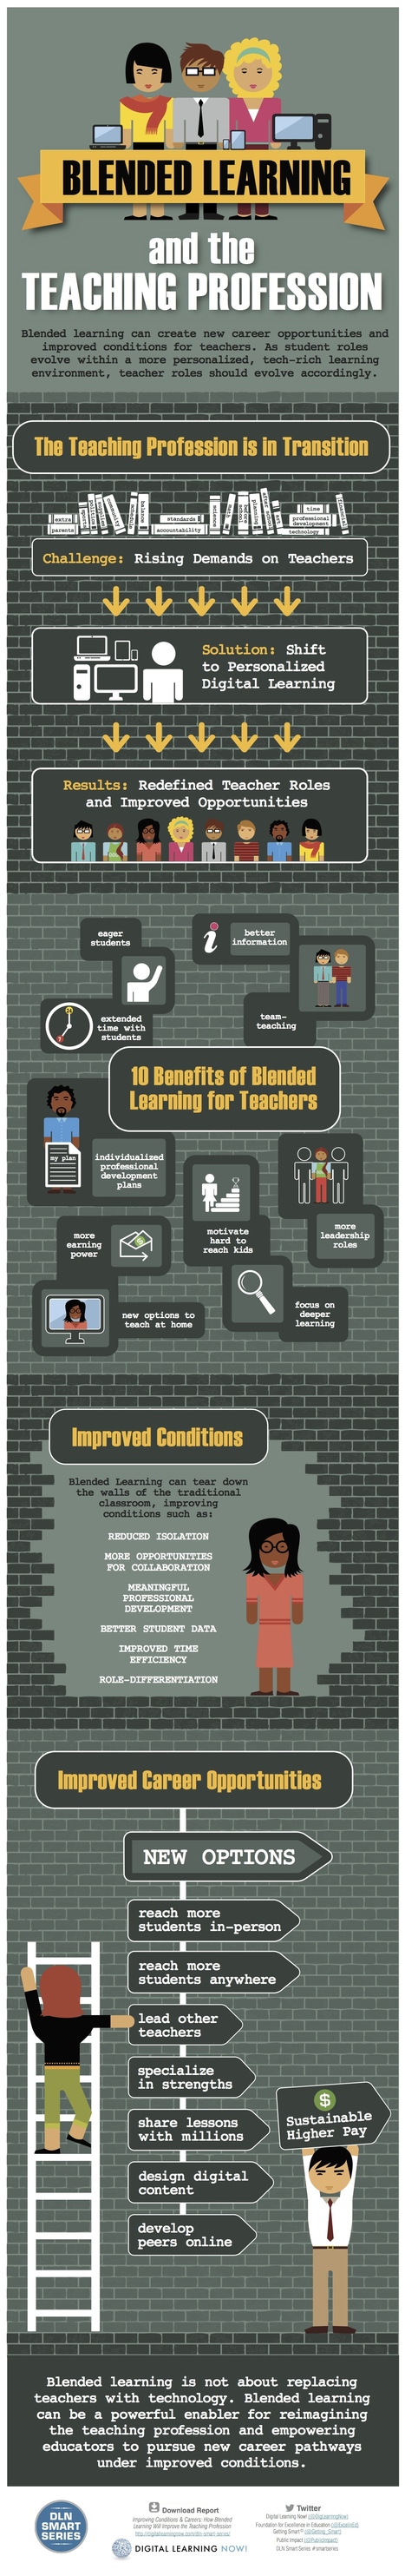 10 Reasons Teachers should Try Blended Learning [Infographic] | blended learning | Scoop.it